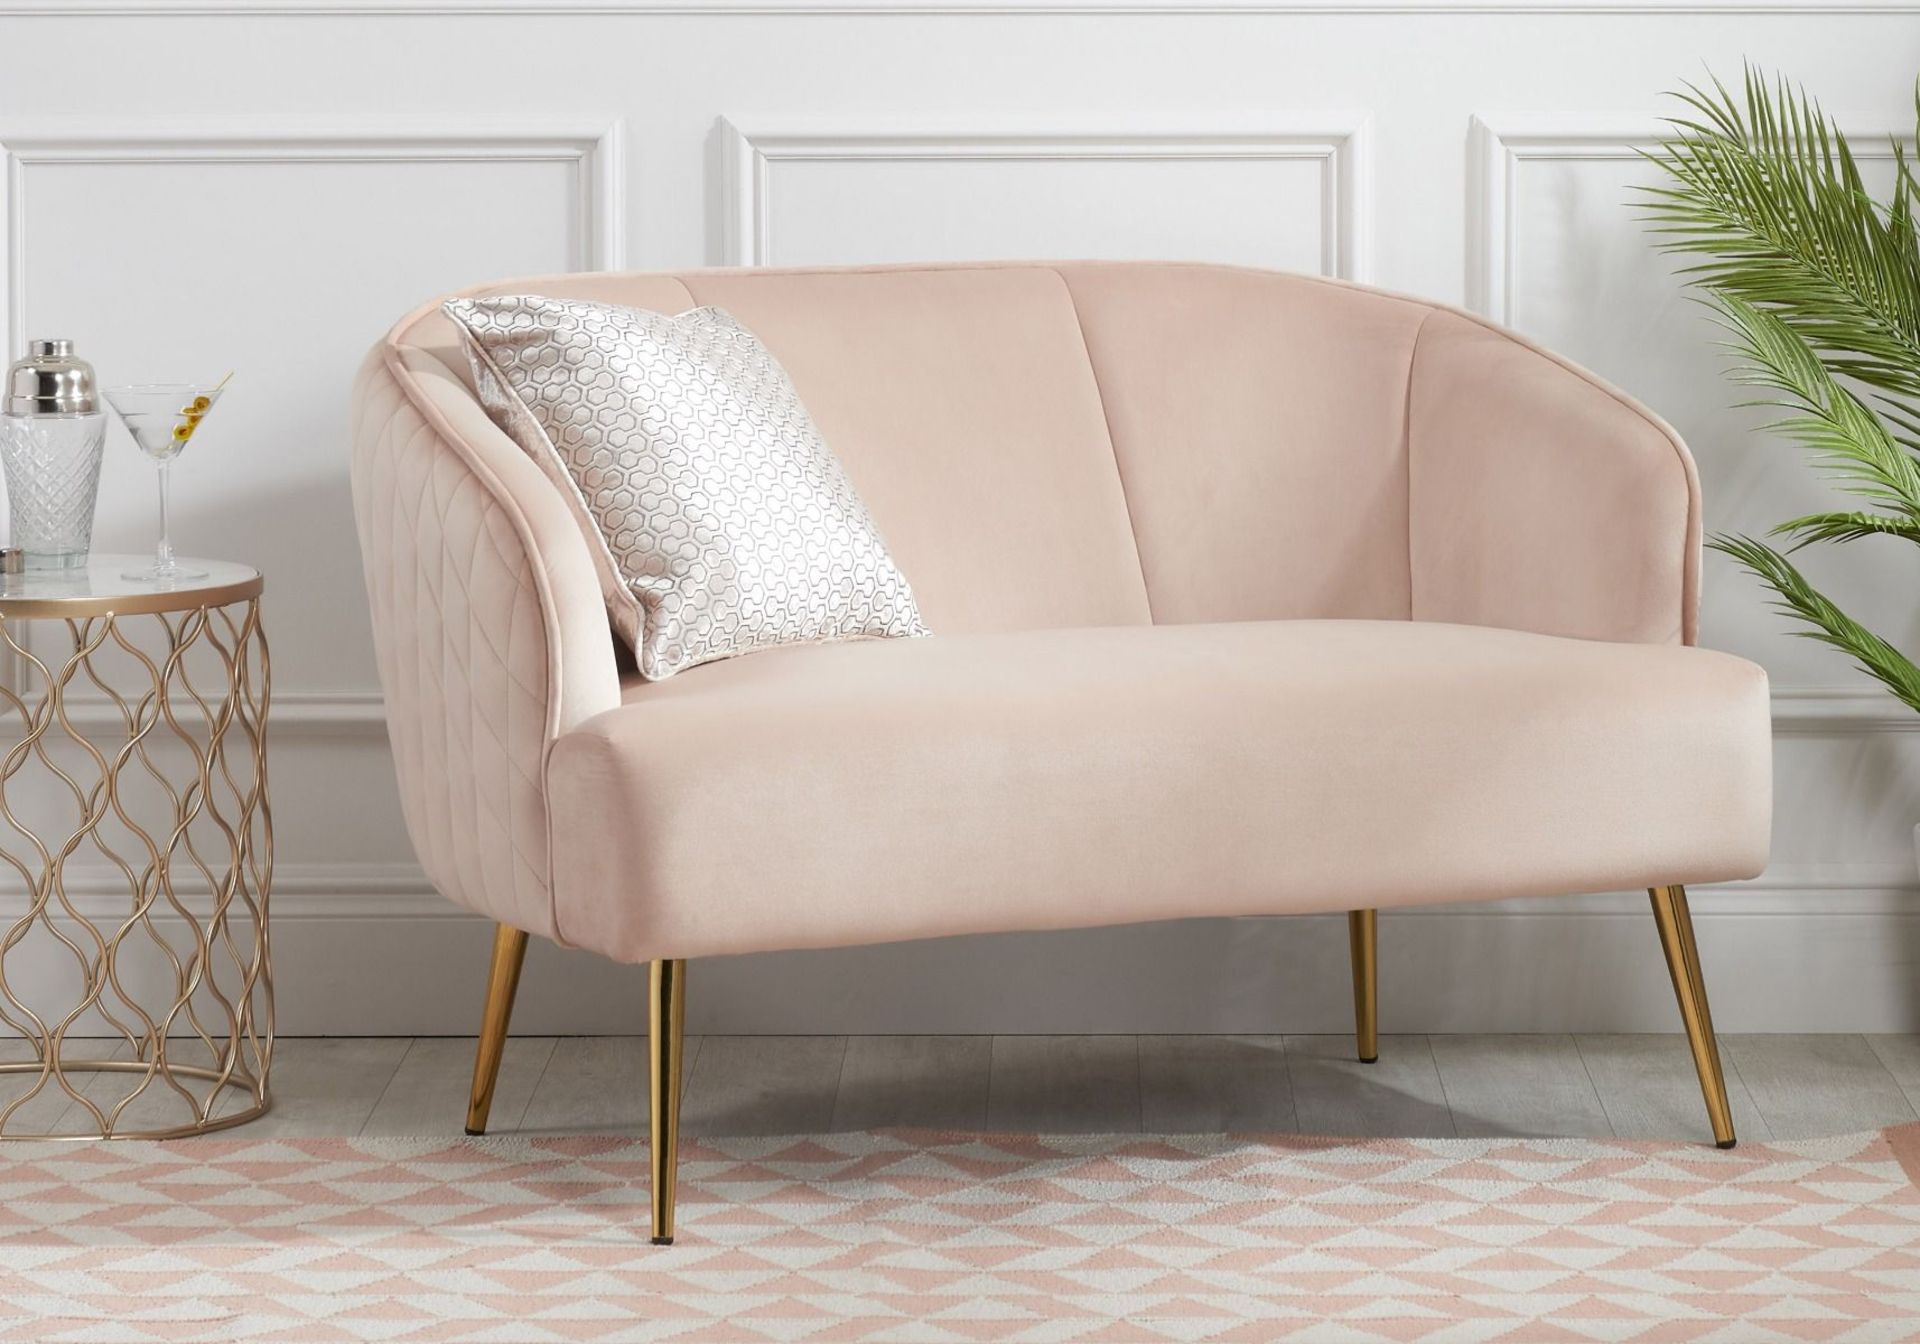 Belal Sofa Stunning blush pink finish to complement a wide range of living rooms and